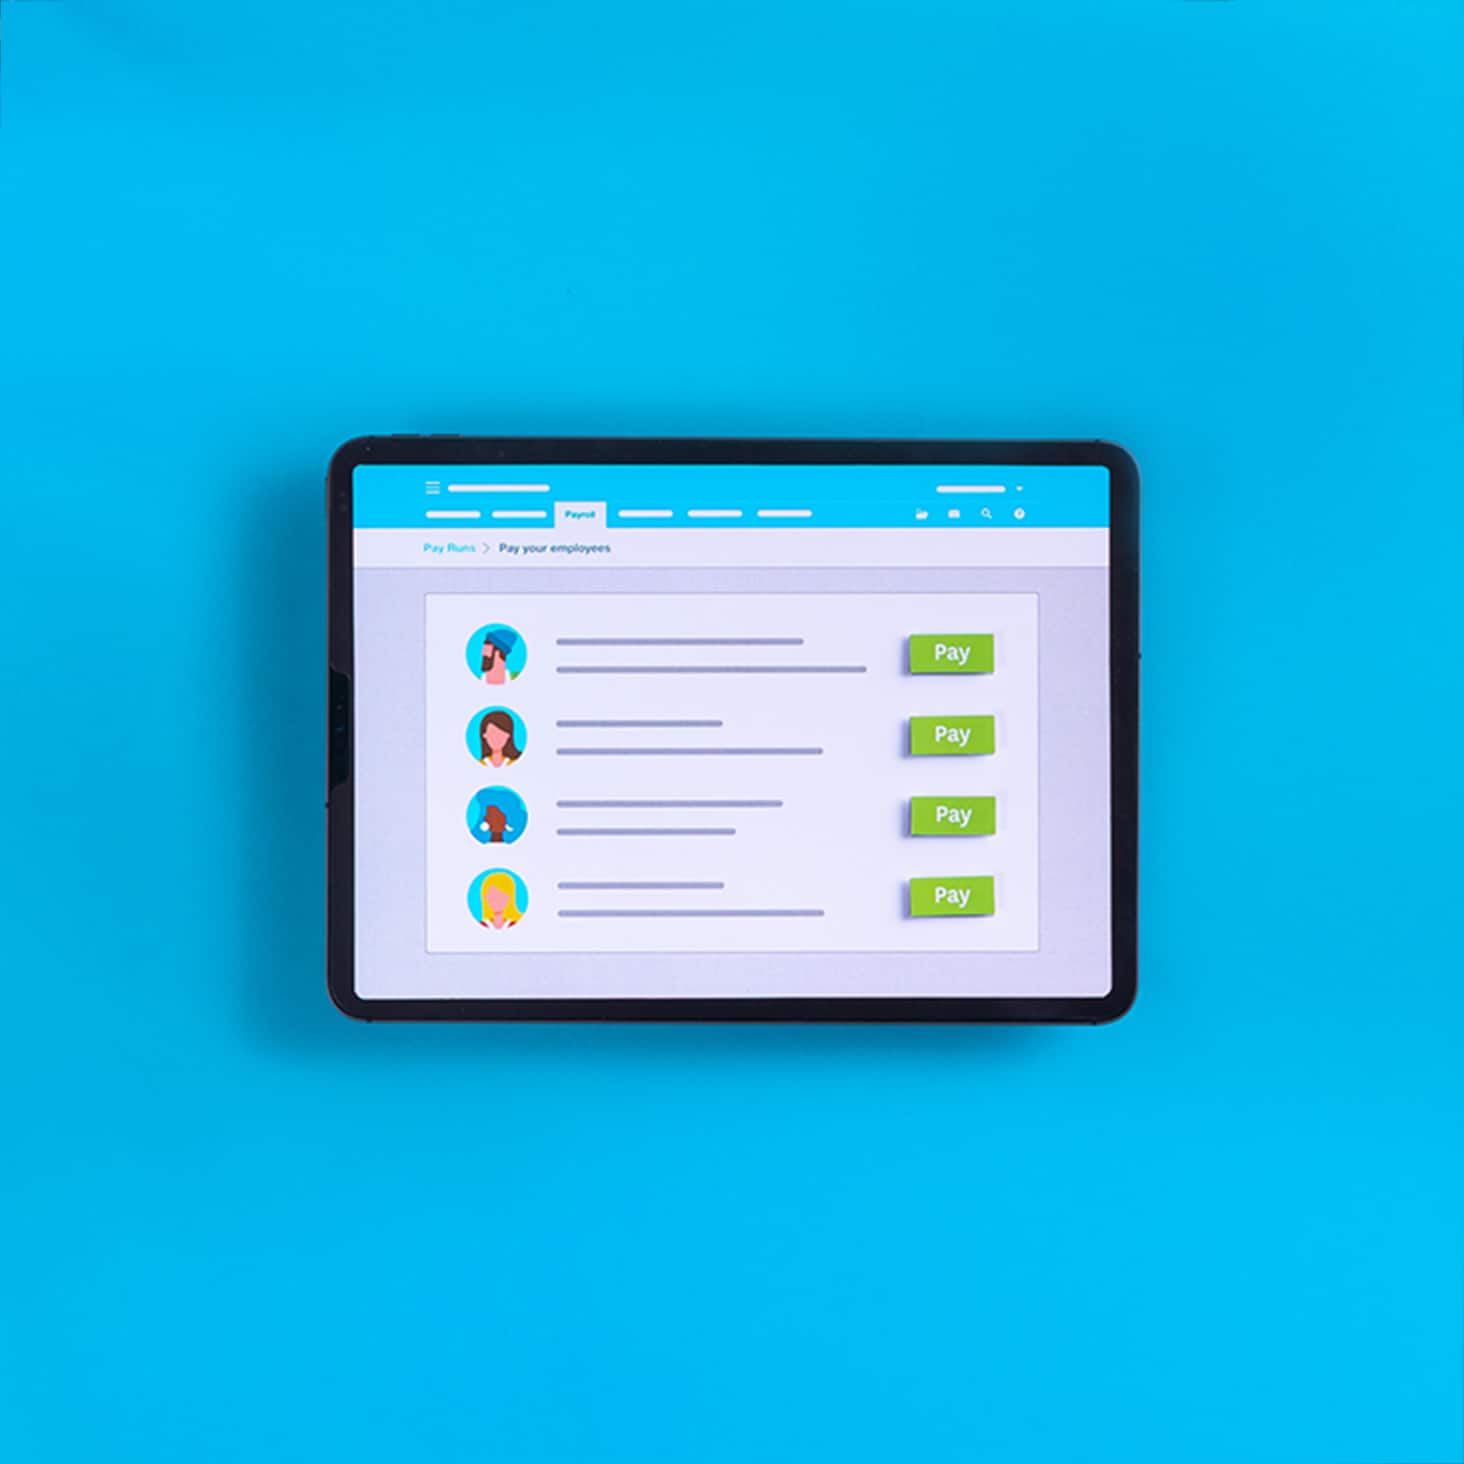 Xero cloud payroll software being used by an Australian business to select employees to be paid in this pay run.